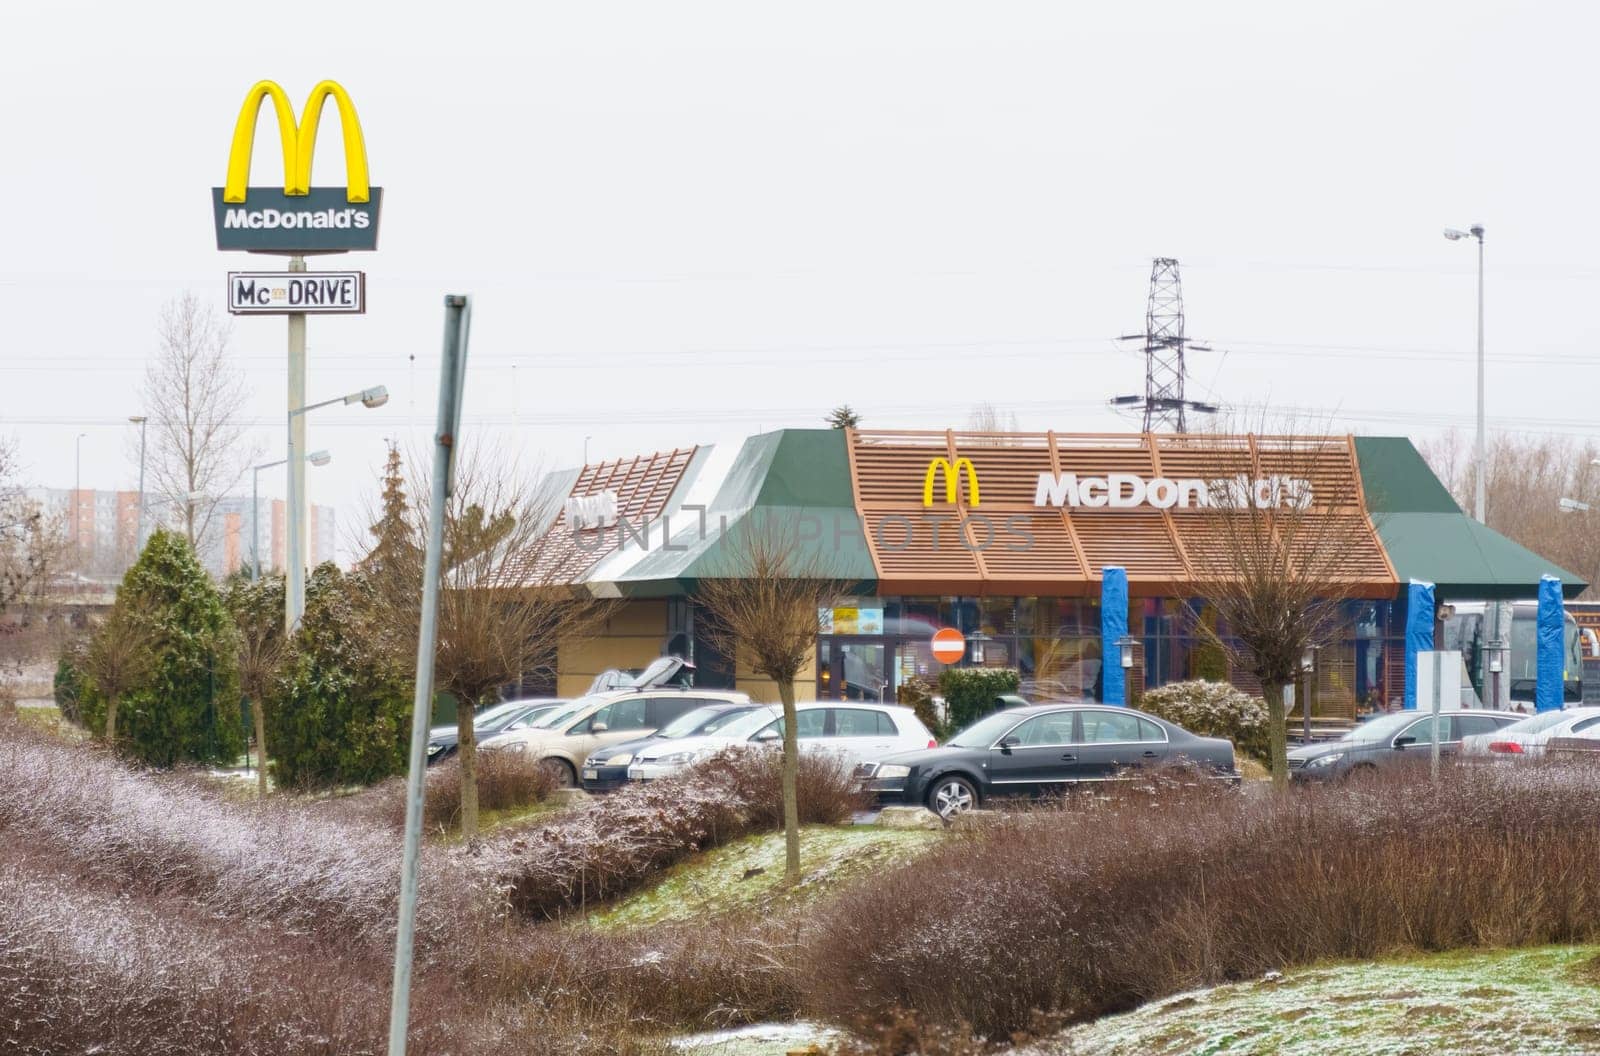 McDonald's restaurant building with logo and car parking in winter by Sd28DimoN_1976